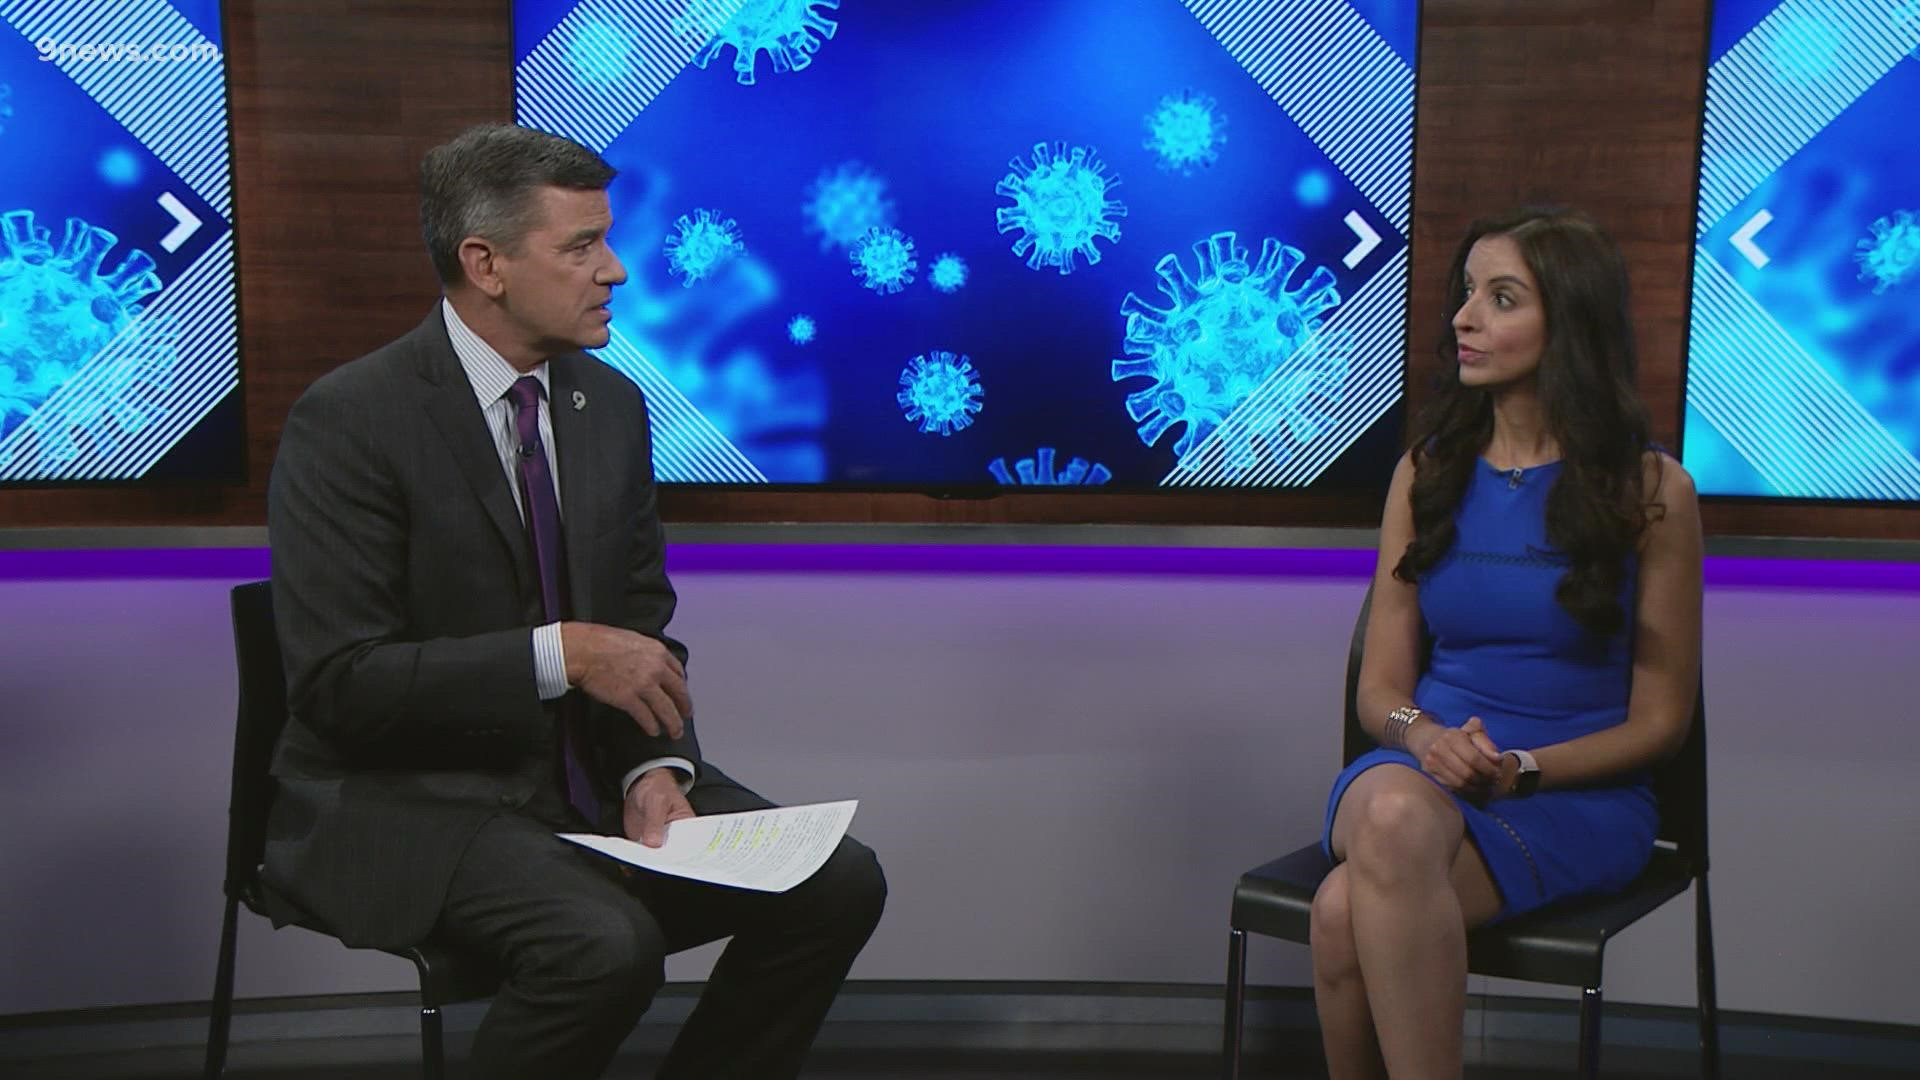 9Health expert Dr. Payal Kohli talks about how to travel safely heading into the holiday season in pandemic-era traveling.